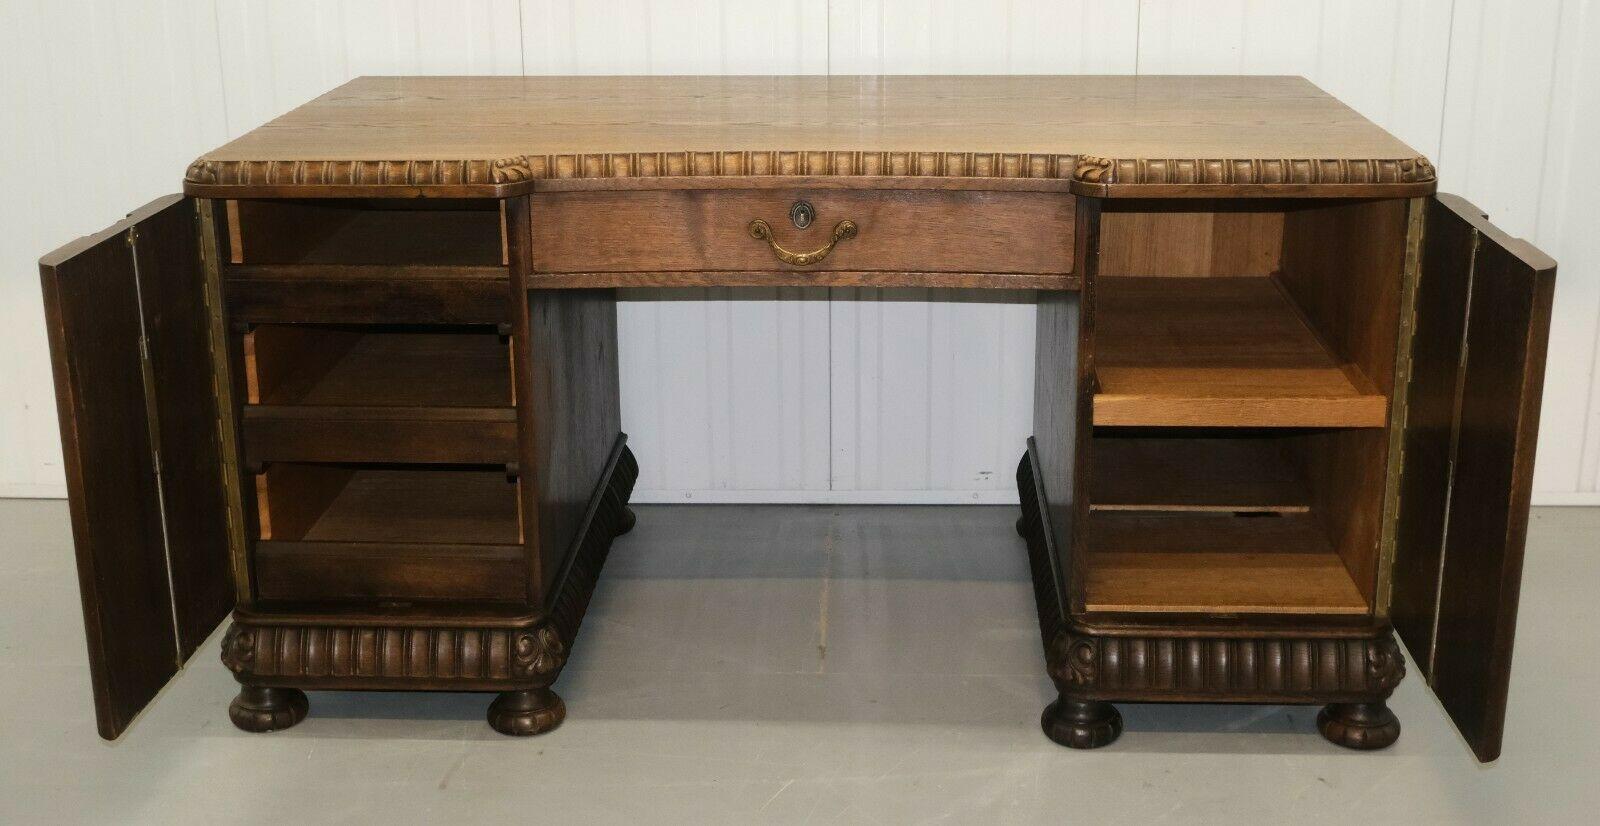 Hand-Crafted 20th Century Oak Desk with Grapes and Vine Leaves Carvings & Sliding Shelves